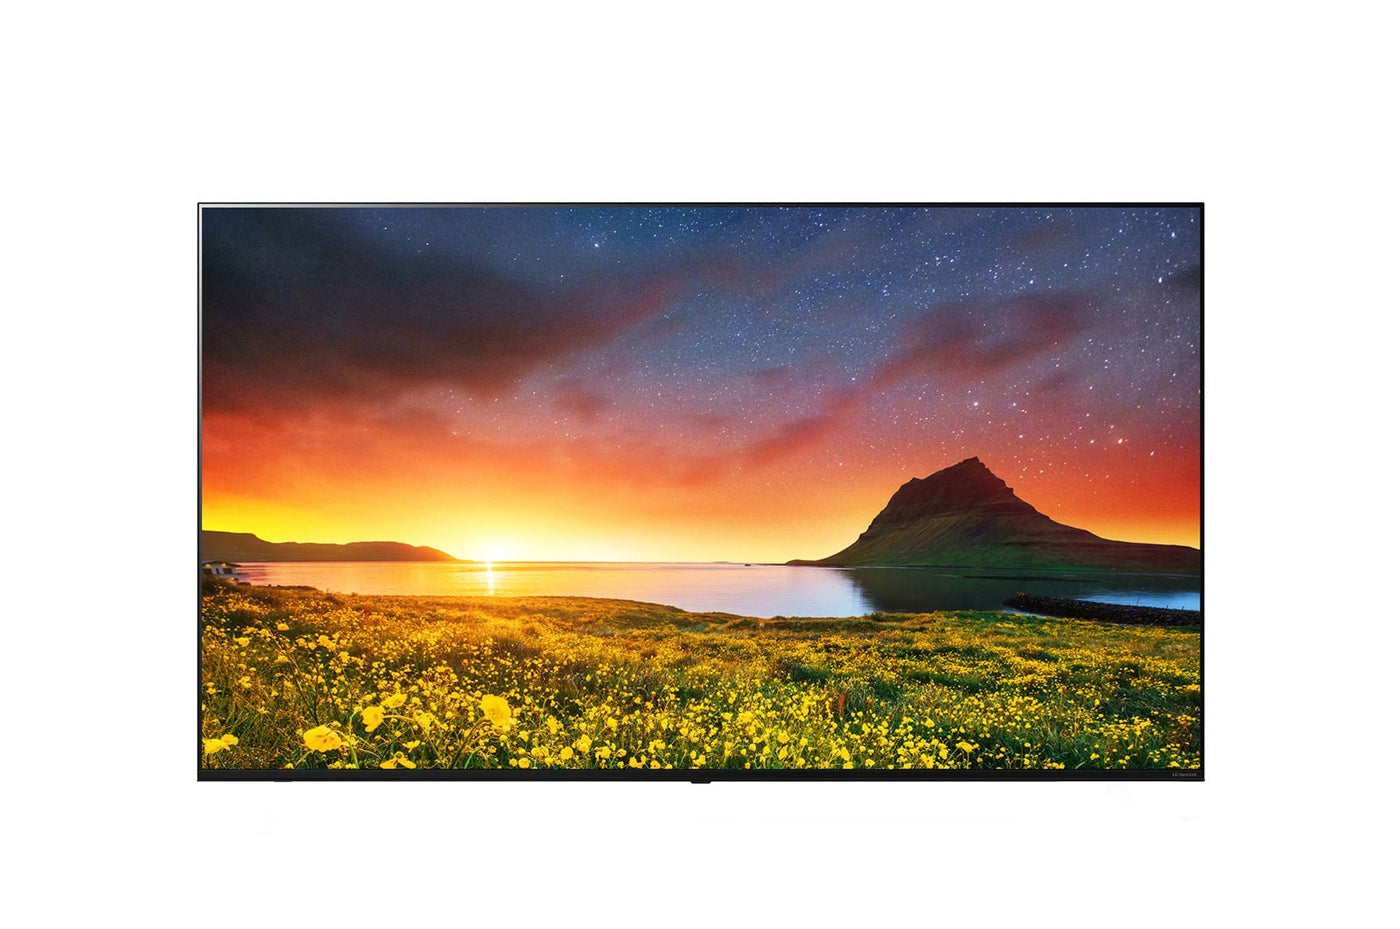 LG 75UR760H9 75" Pro:Centric 4K UHD Smart Hospitality TV Front View